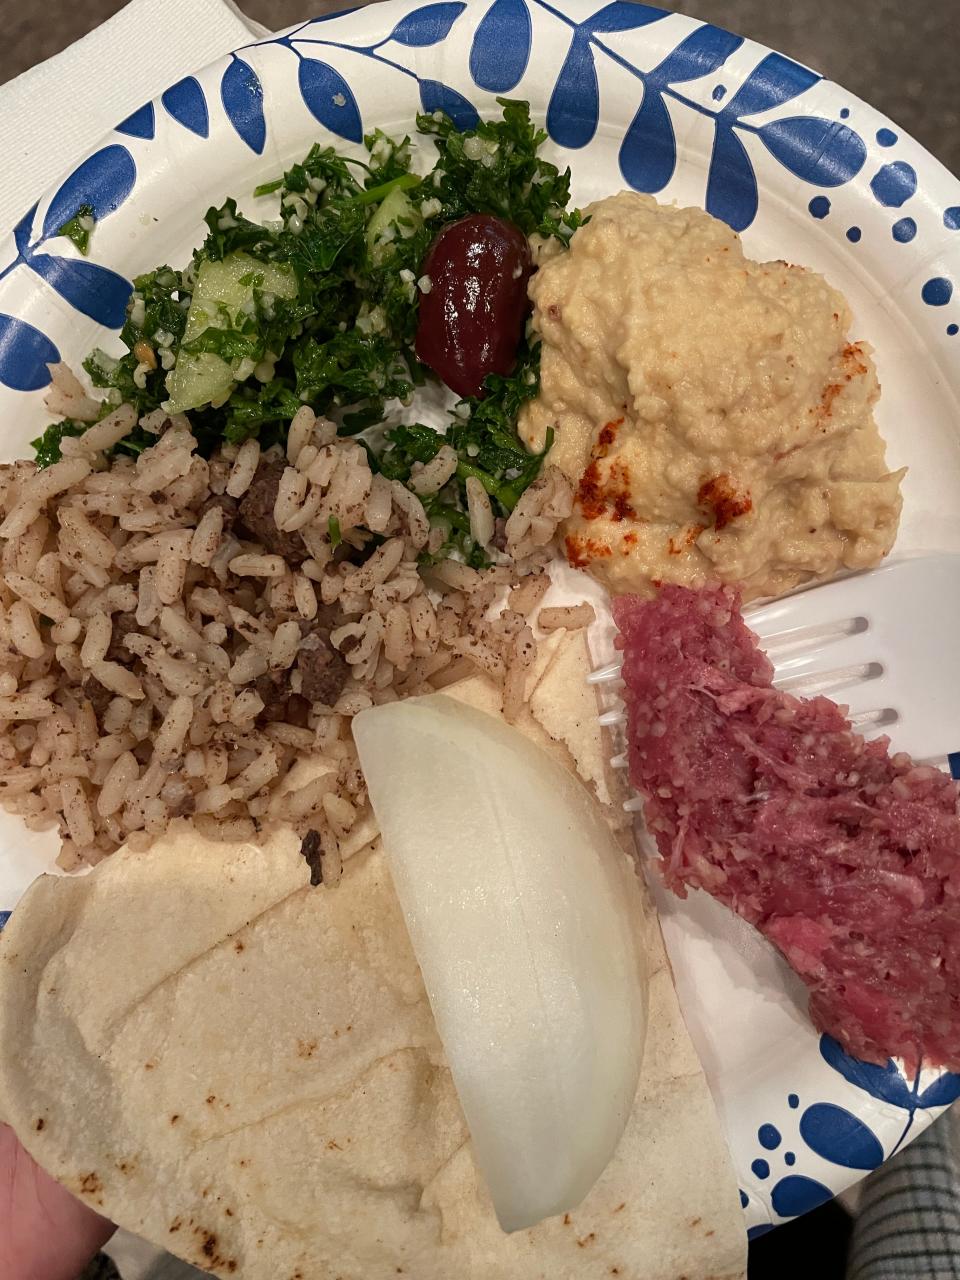 The Desert Inn offered hummus and pita, tabouli (parsley salad), raw kibbee and Syrian rice.